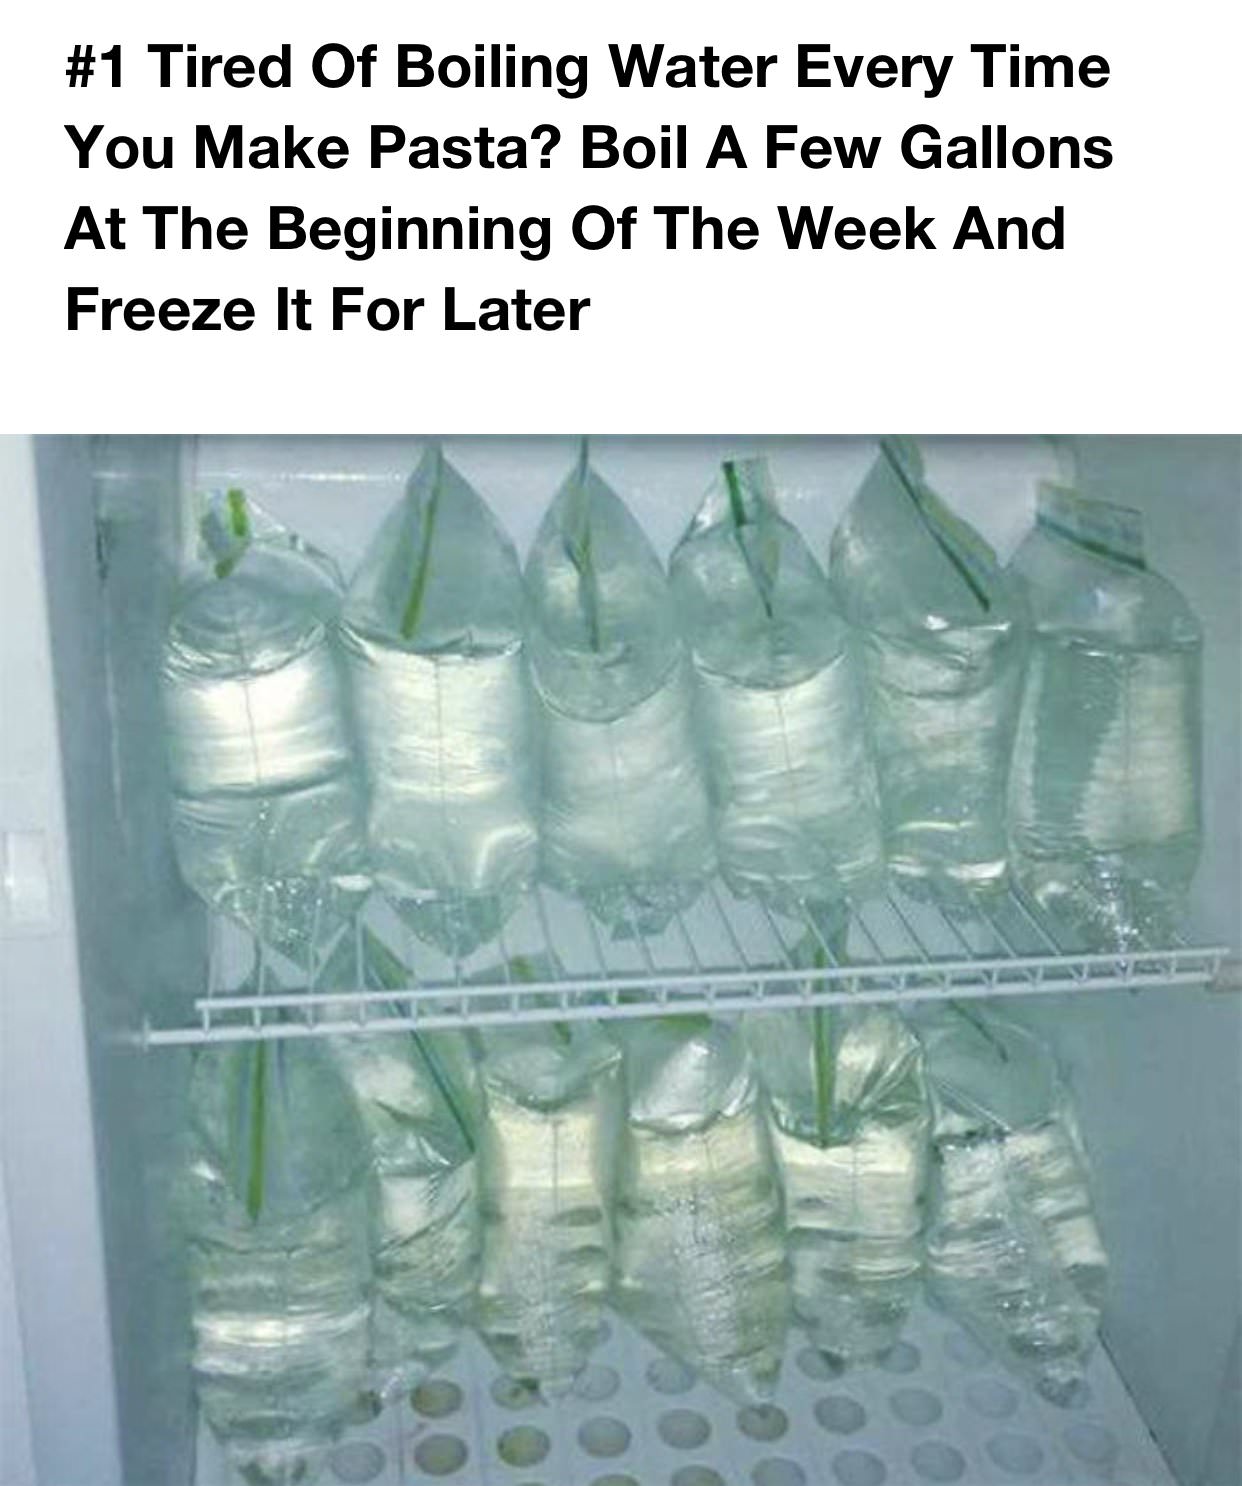 tired of boiling water for pasta - Tired Of Boiling Water Every Time You Make Pasta? Boil A Few Gallons At The Beginning Of The Week And Freeze It For Later